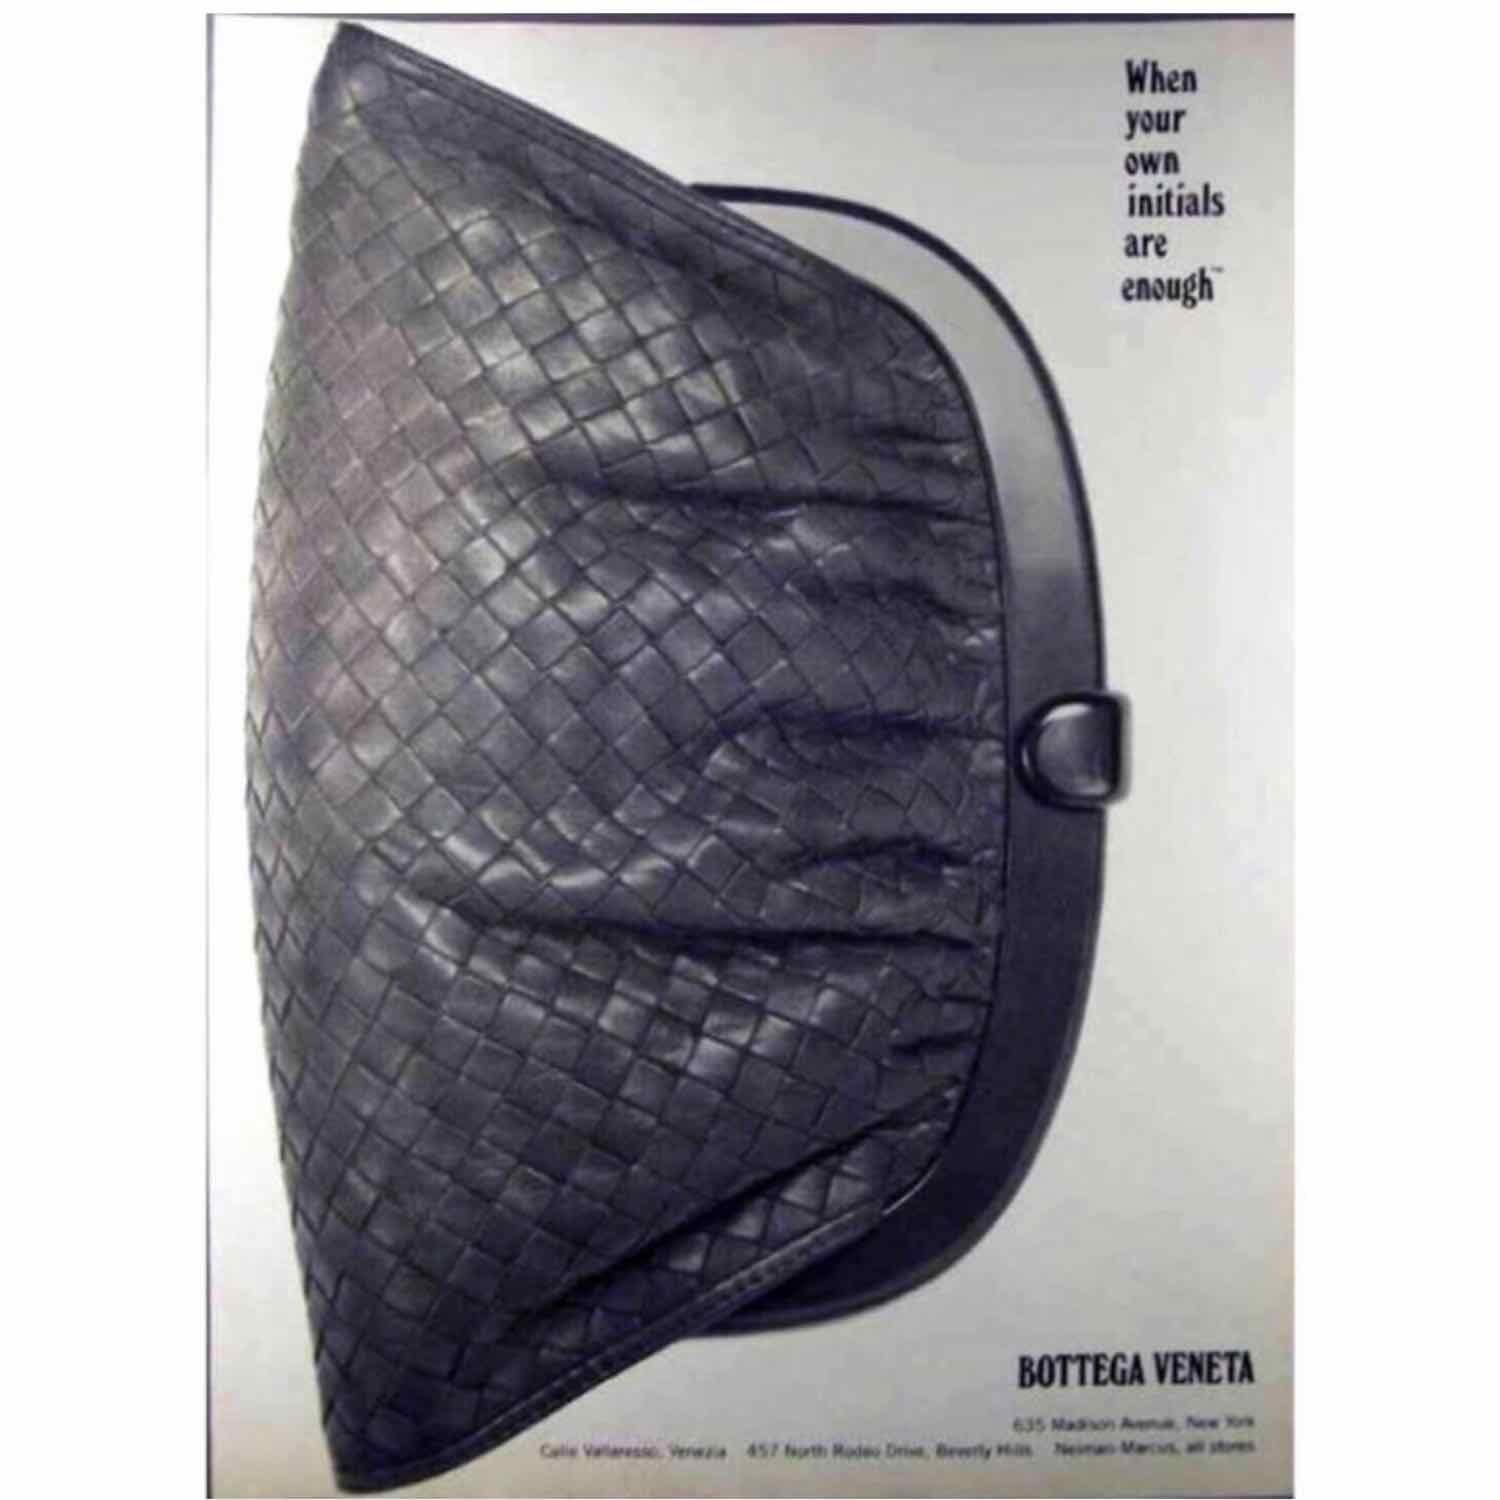 The Bottega Veneta intrecciato weave has and will always be an iconic staple of leather and luxury. The less-is-more approach allows the design to speak for itself and ensures that it is both fashion-forward and functional. Made in a supple,